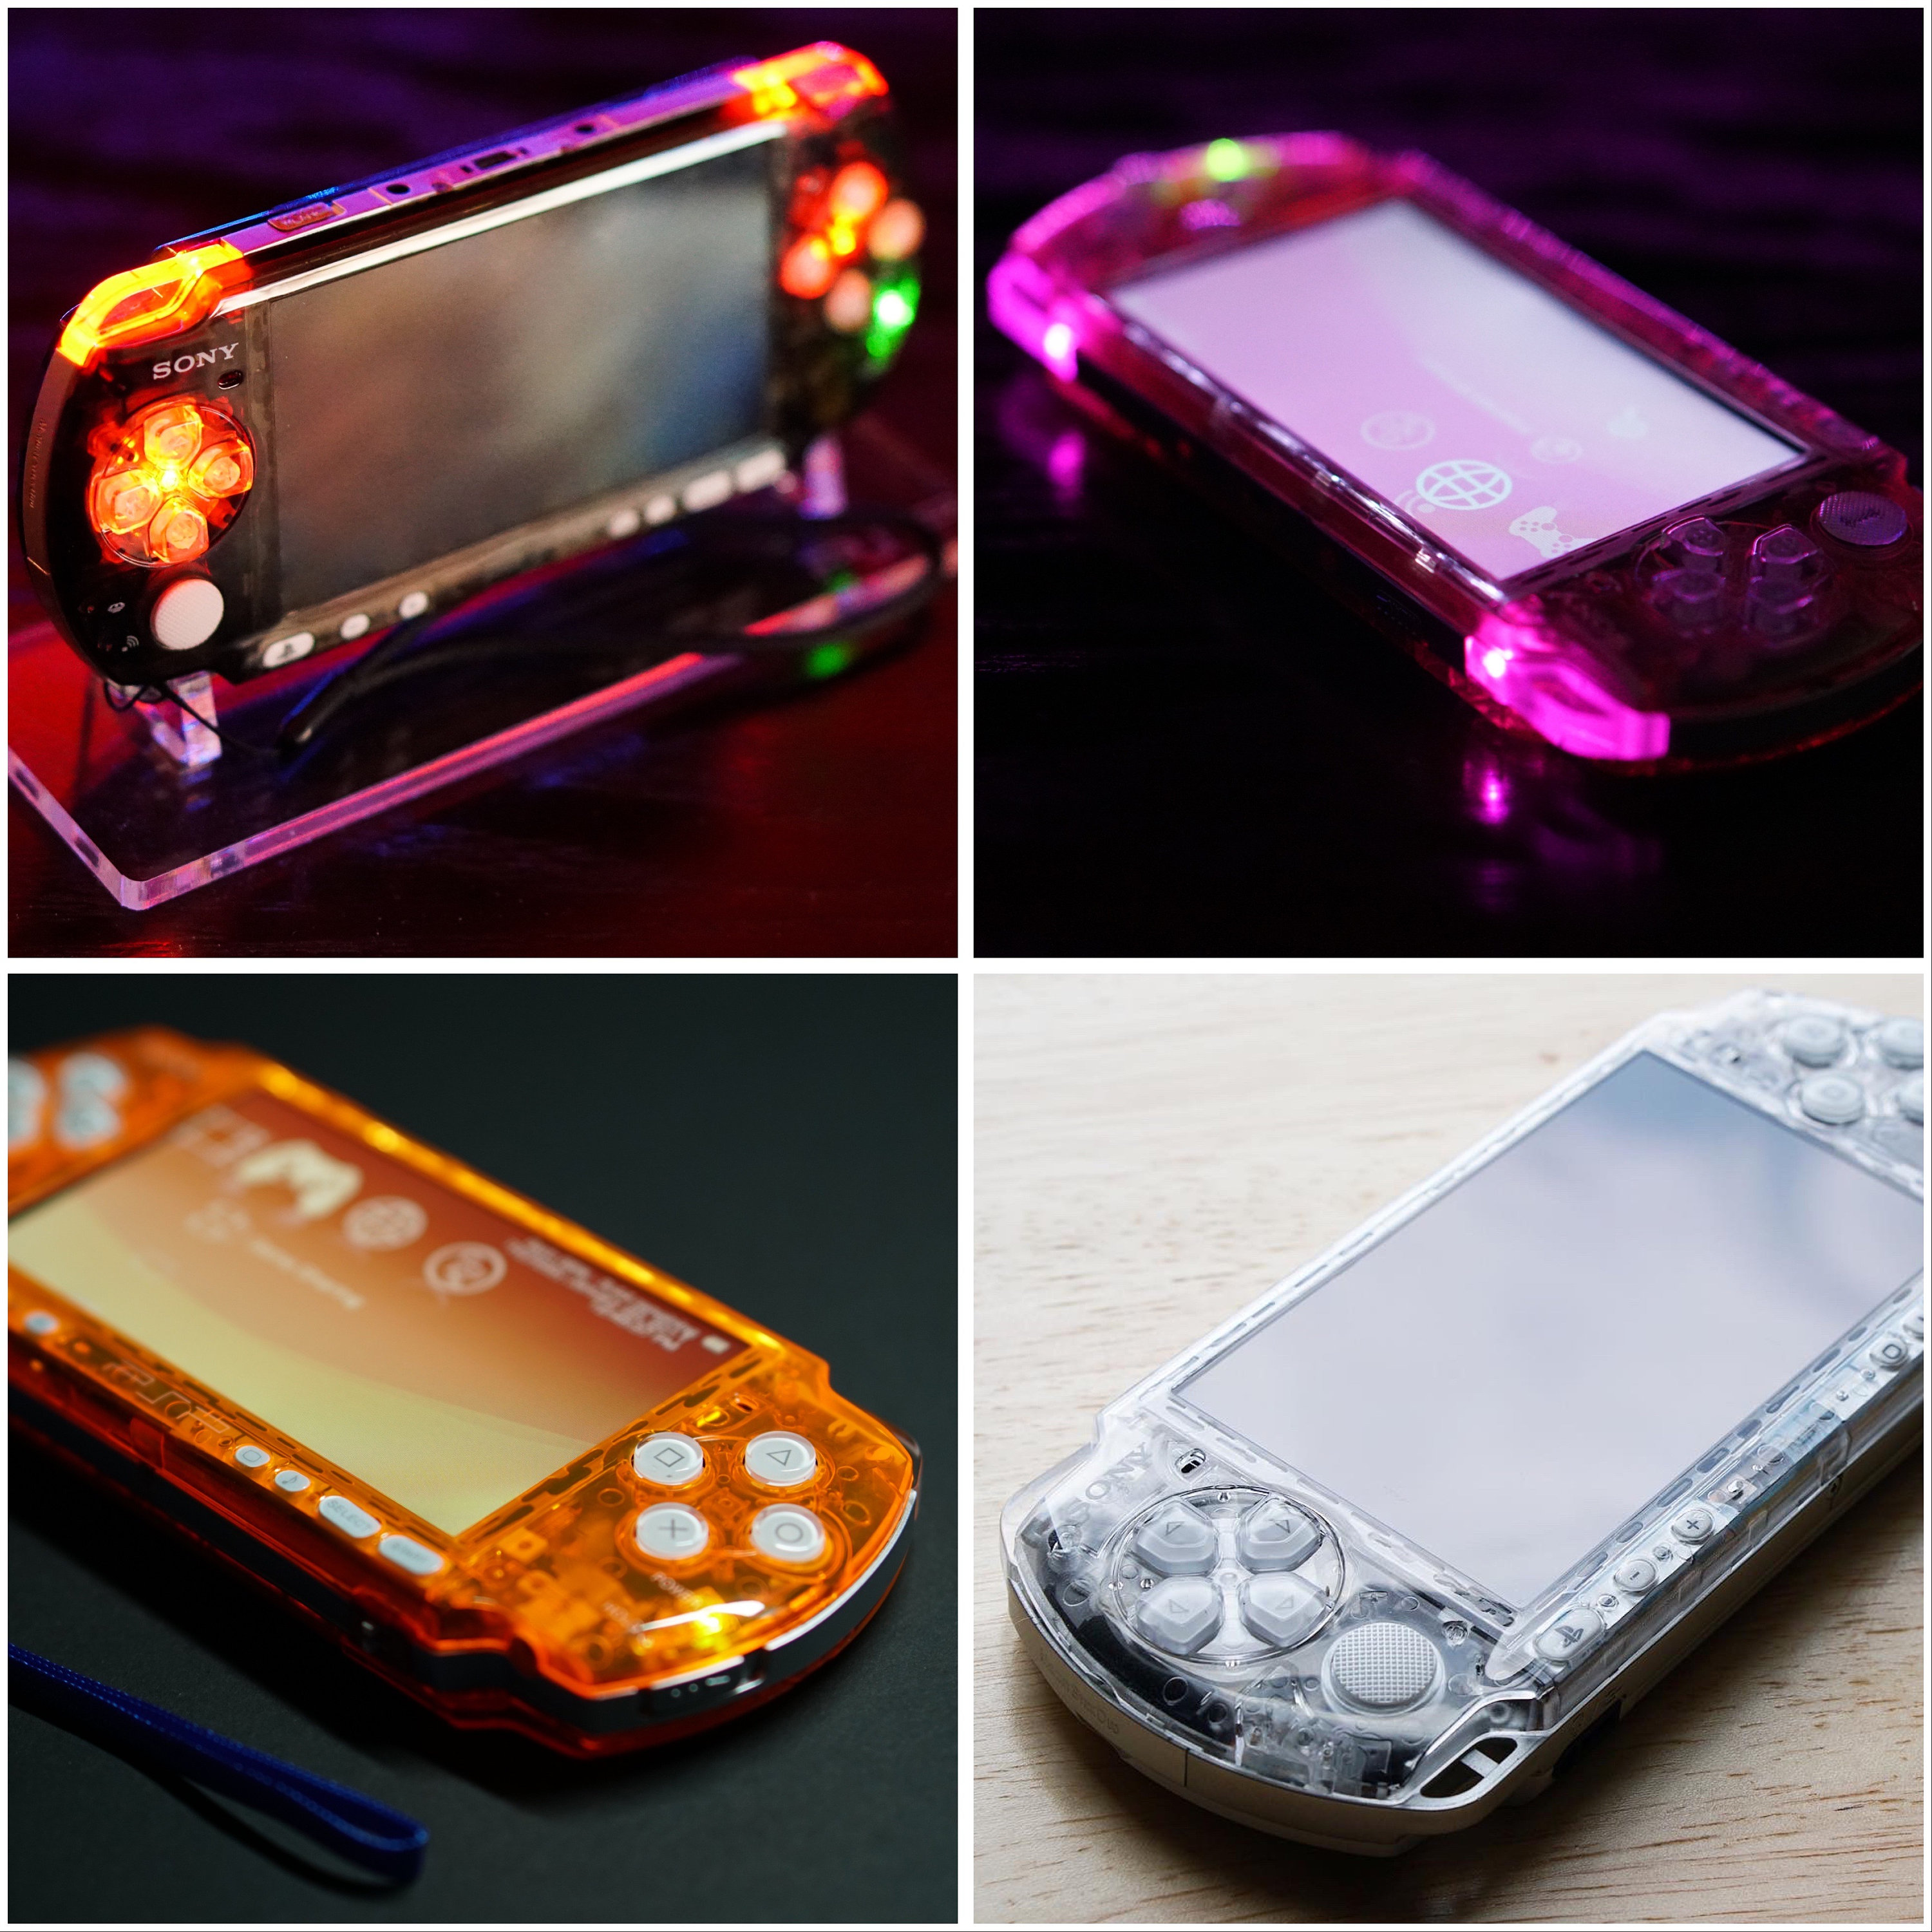 Build to Order Sony PSP 3000 Console new housing shell - Etsy 日本